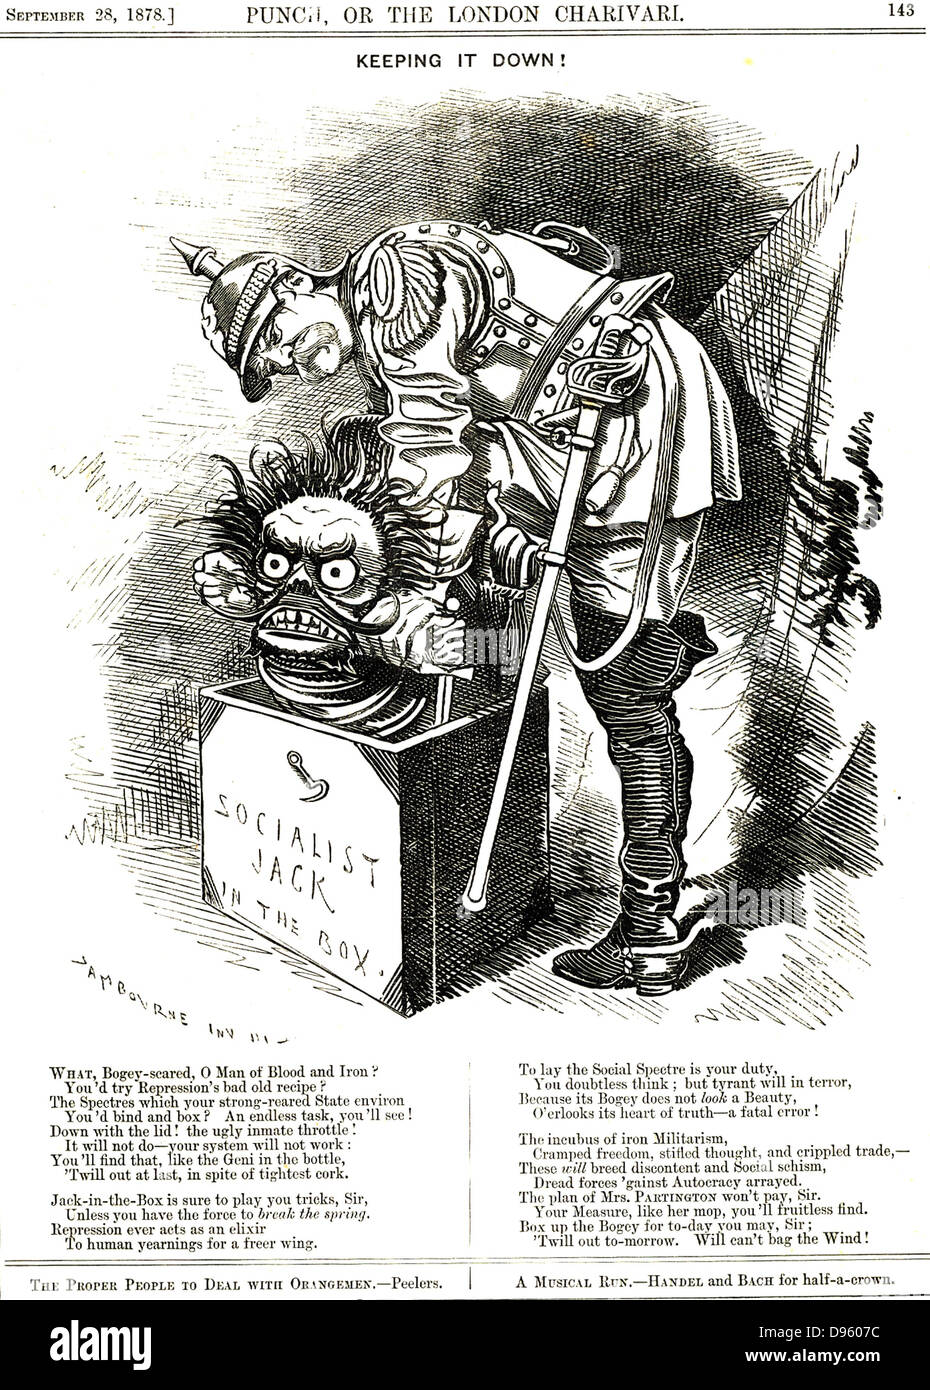 Keeping It Down!'. Otto von Bismarck (1815-1898) Germany Chancellor, trying to force the Jack of Socialism back in his box.  The captions tells him that every act of repression acts an elixir to the human wish for more freedom.  Cartoon by Edward Linley Sambourne from 'Punch', London. Stock Photo